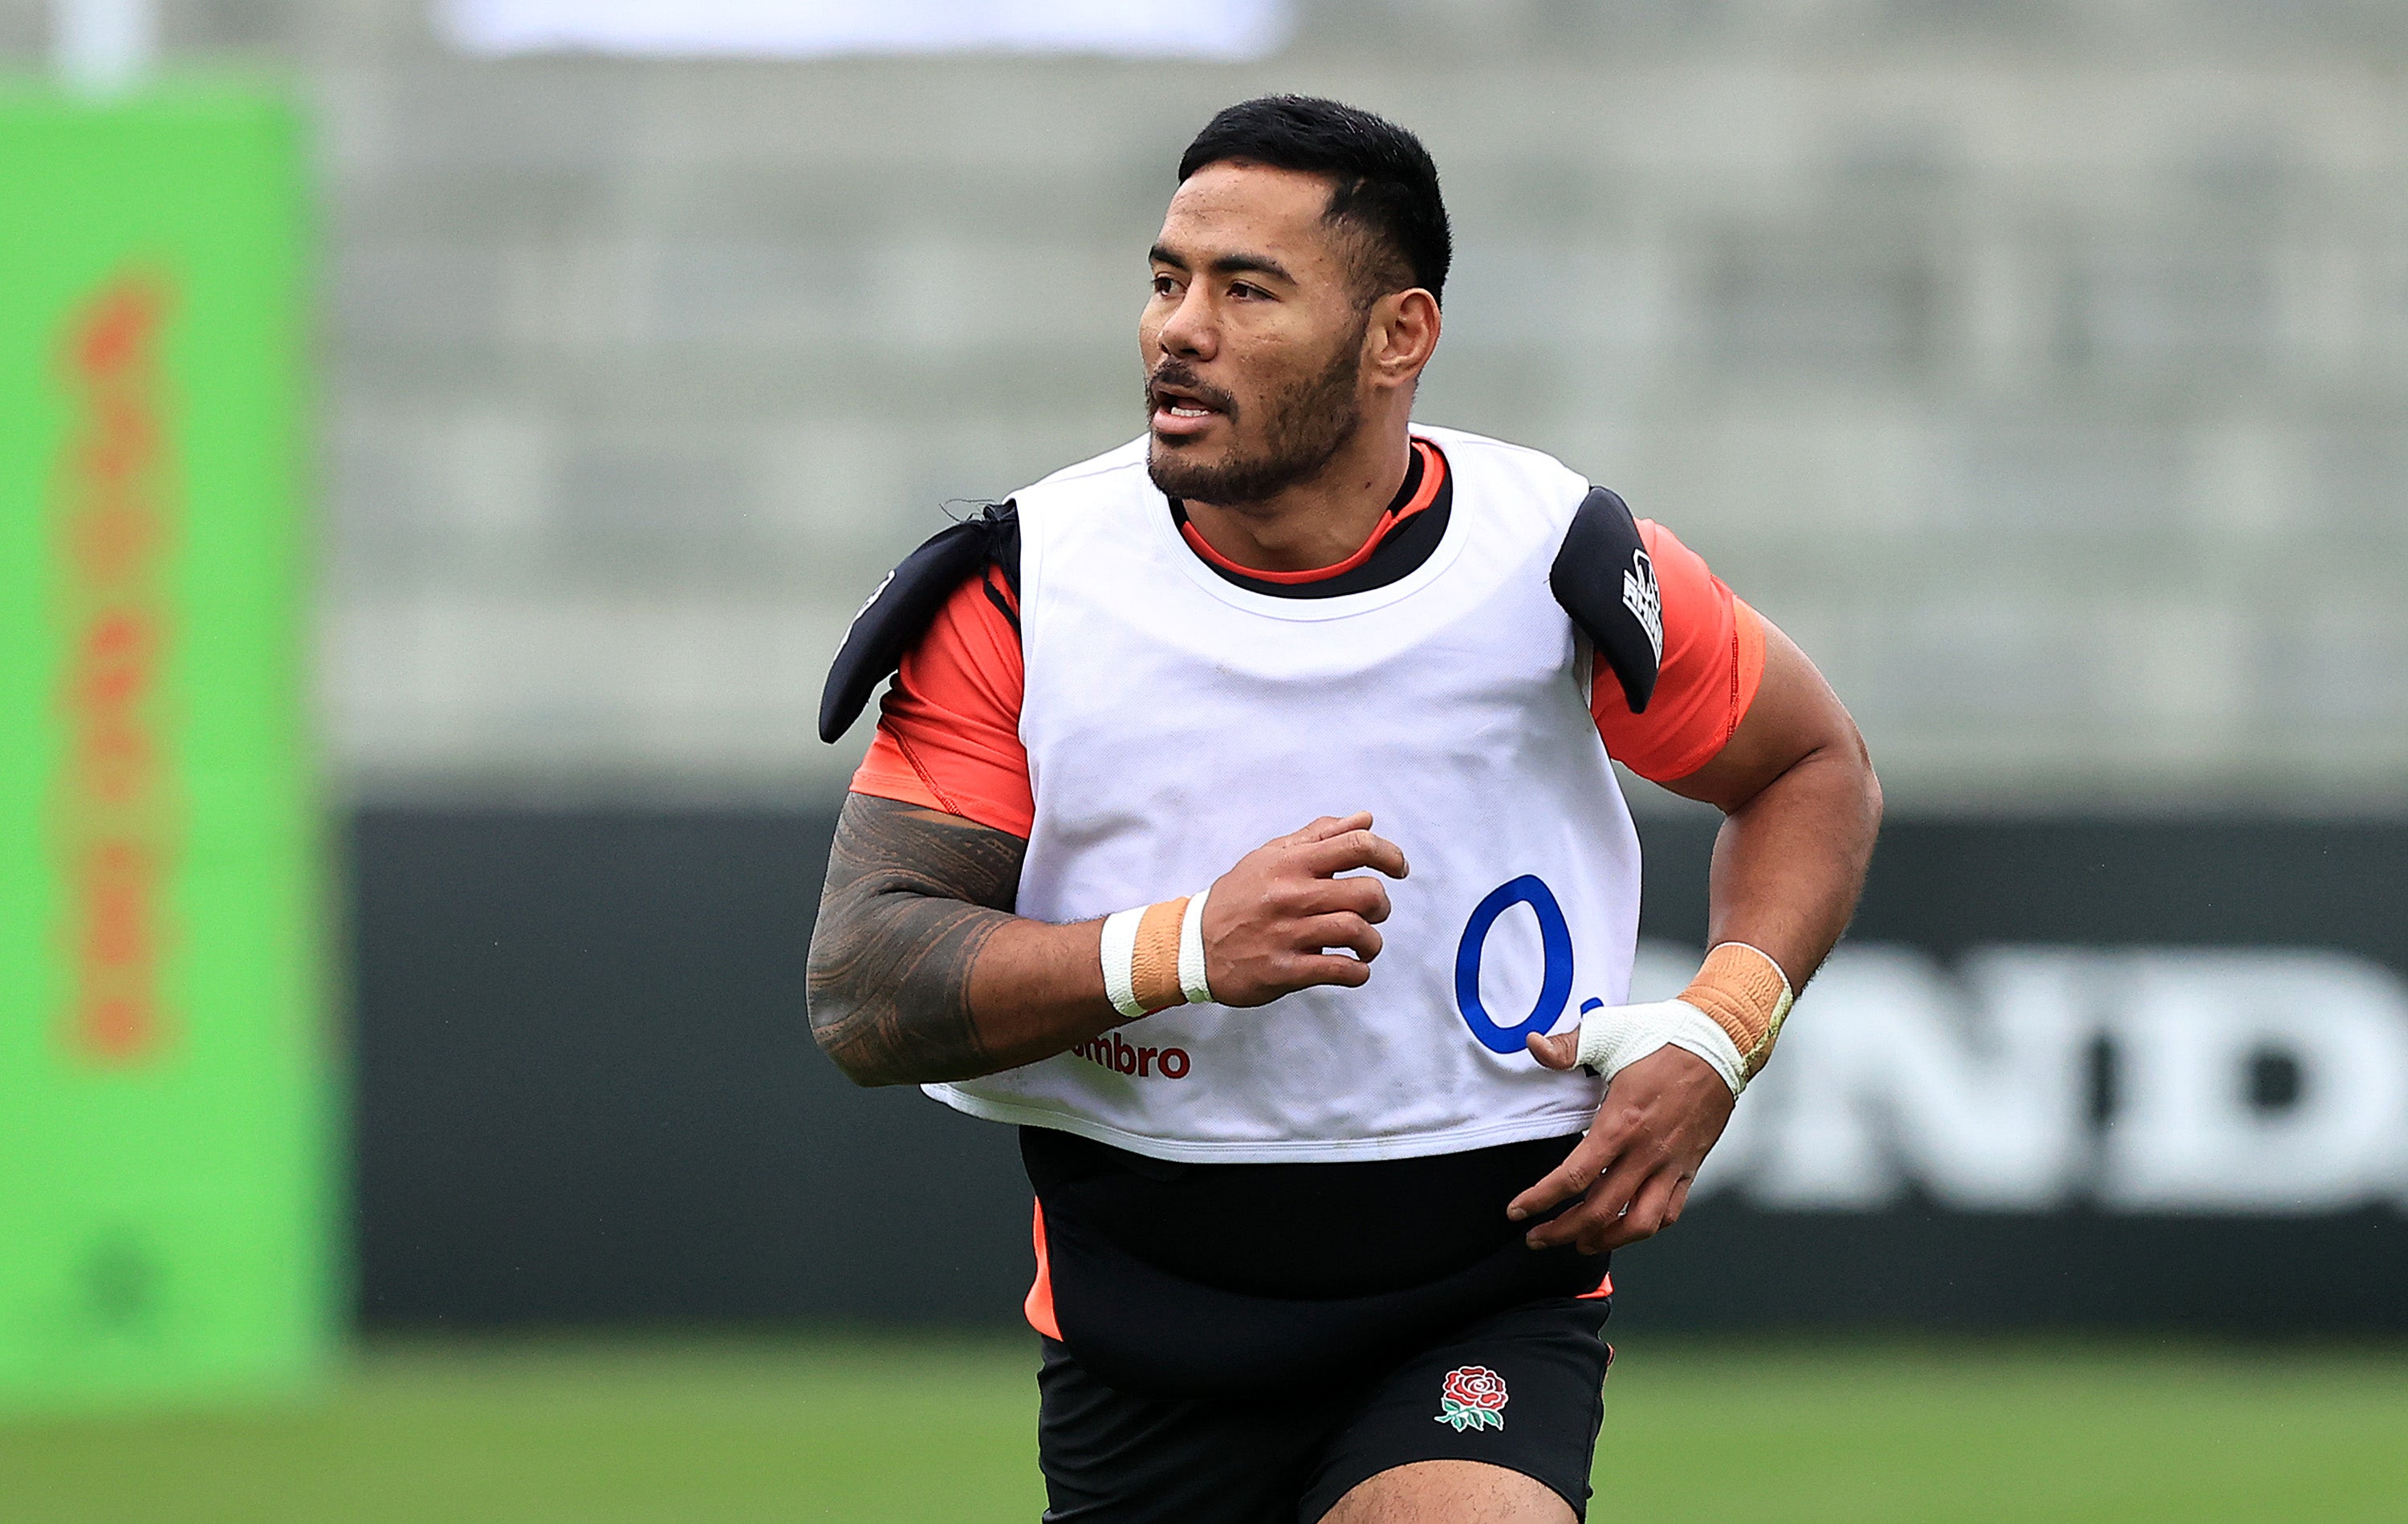 Tuilagi will make his first Six Nations start in almost two years